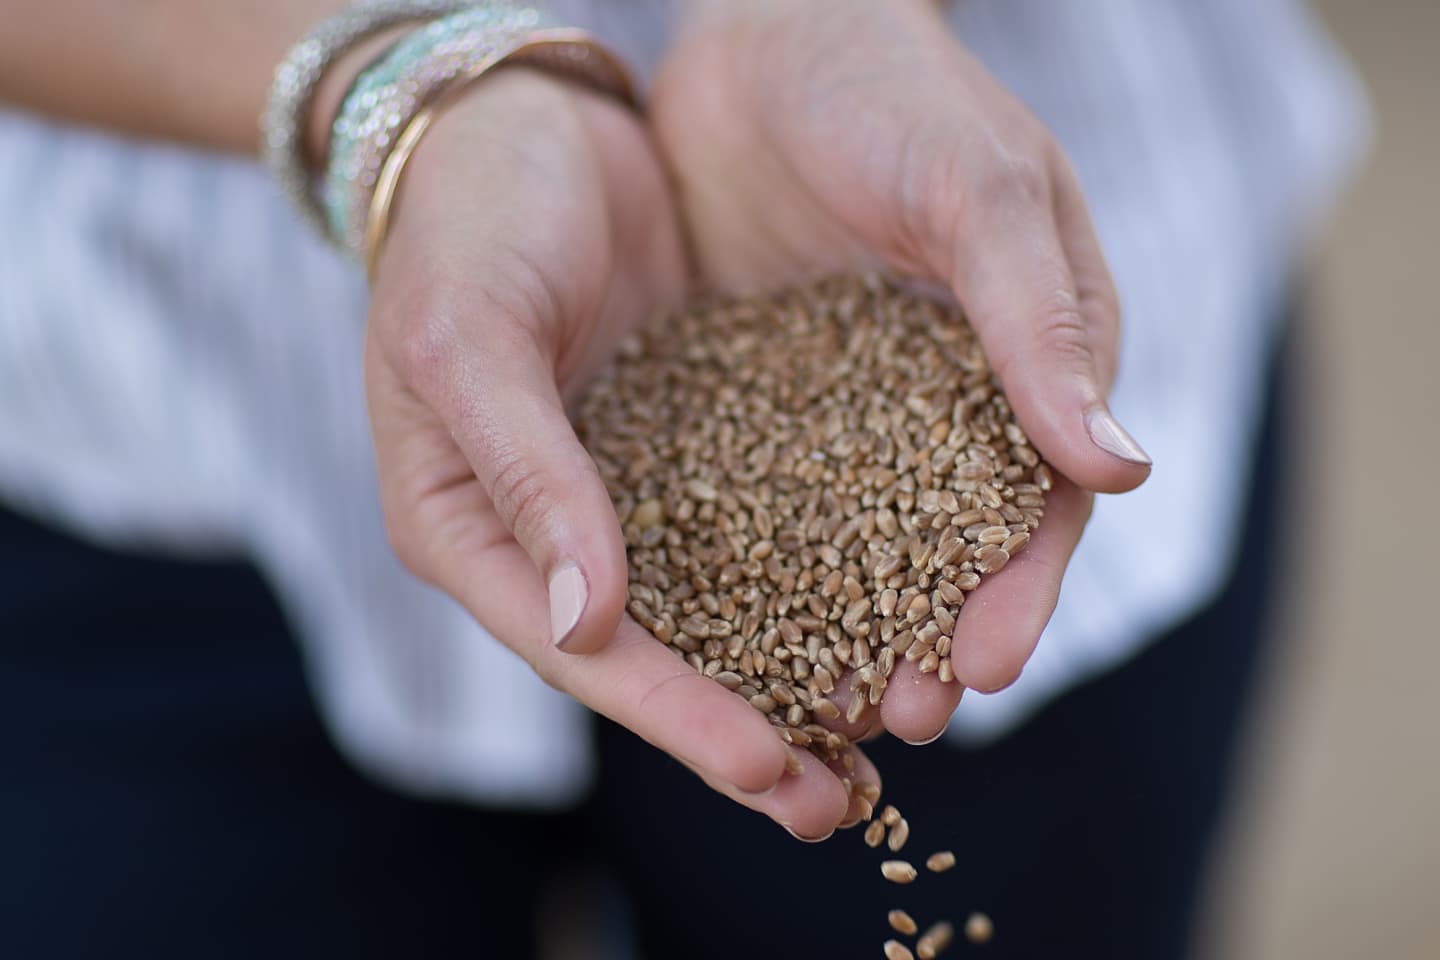 Woman's hands holding wheat seeds